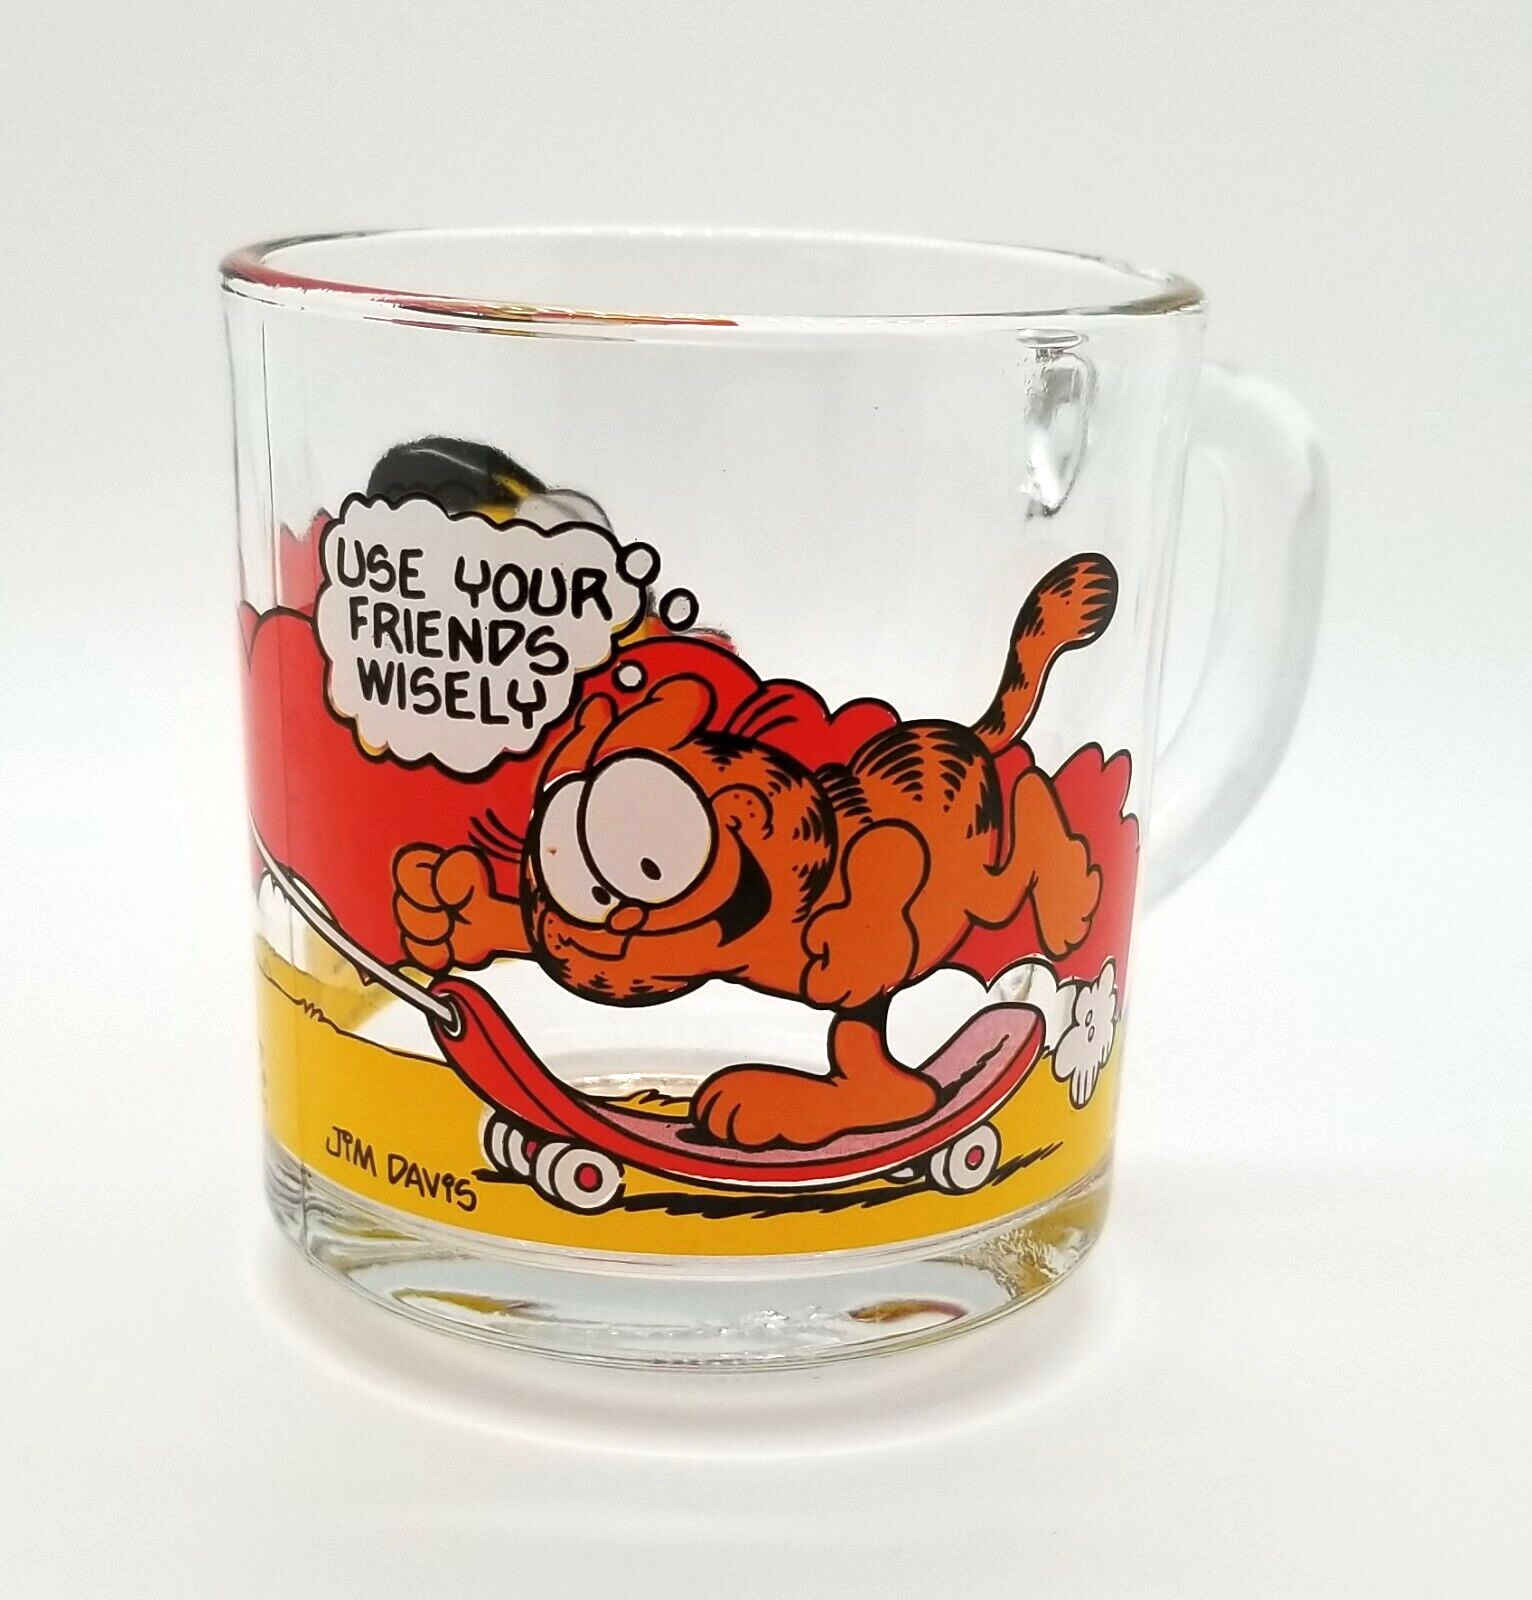 Vintage 1978 McDonalds GARFIELD Use Your Friends Wisely 8 Oz Glass Cup Mug